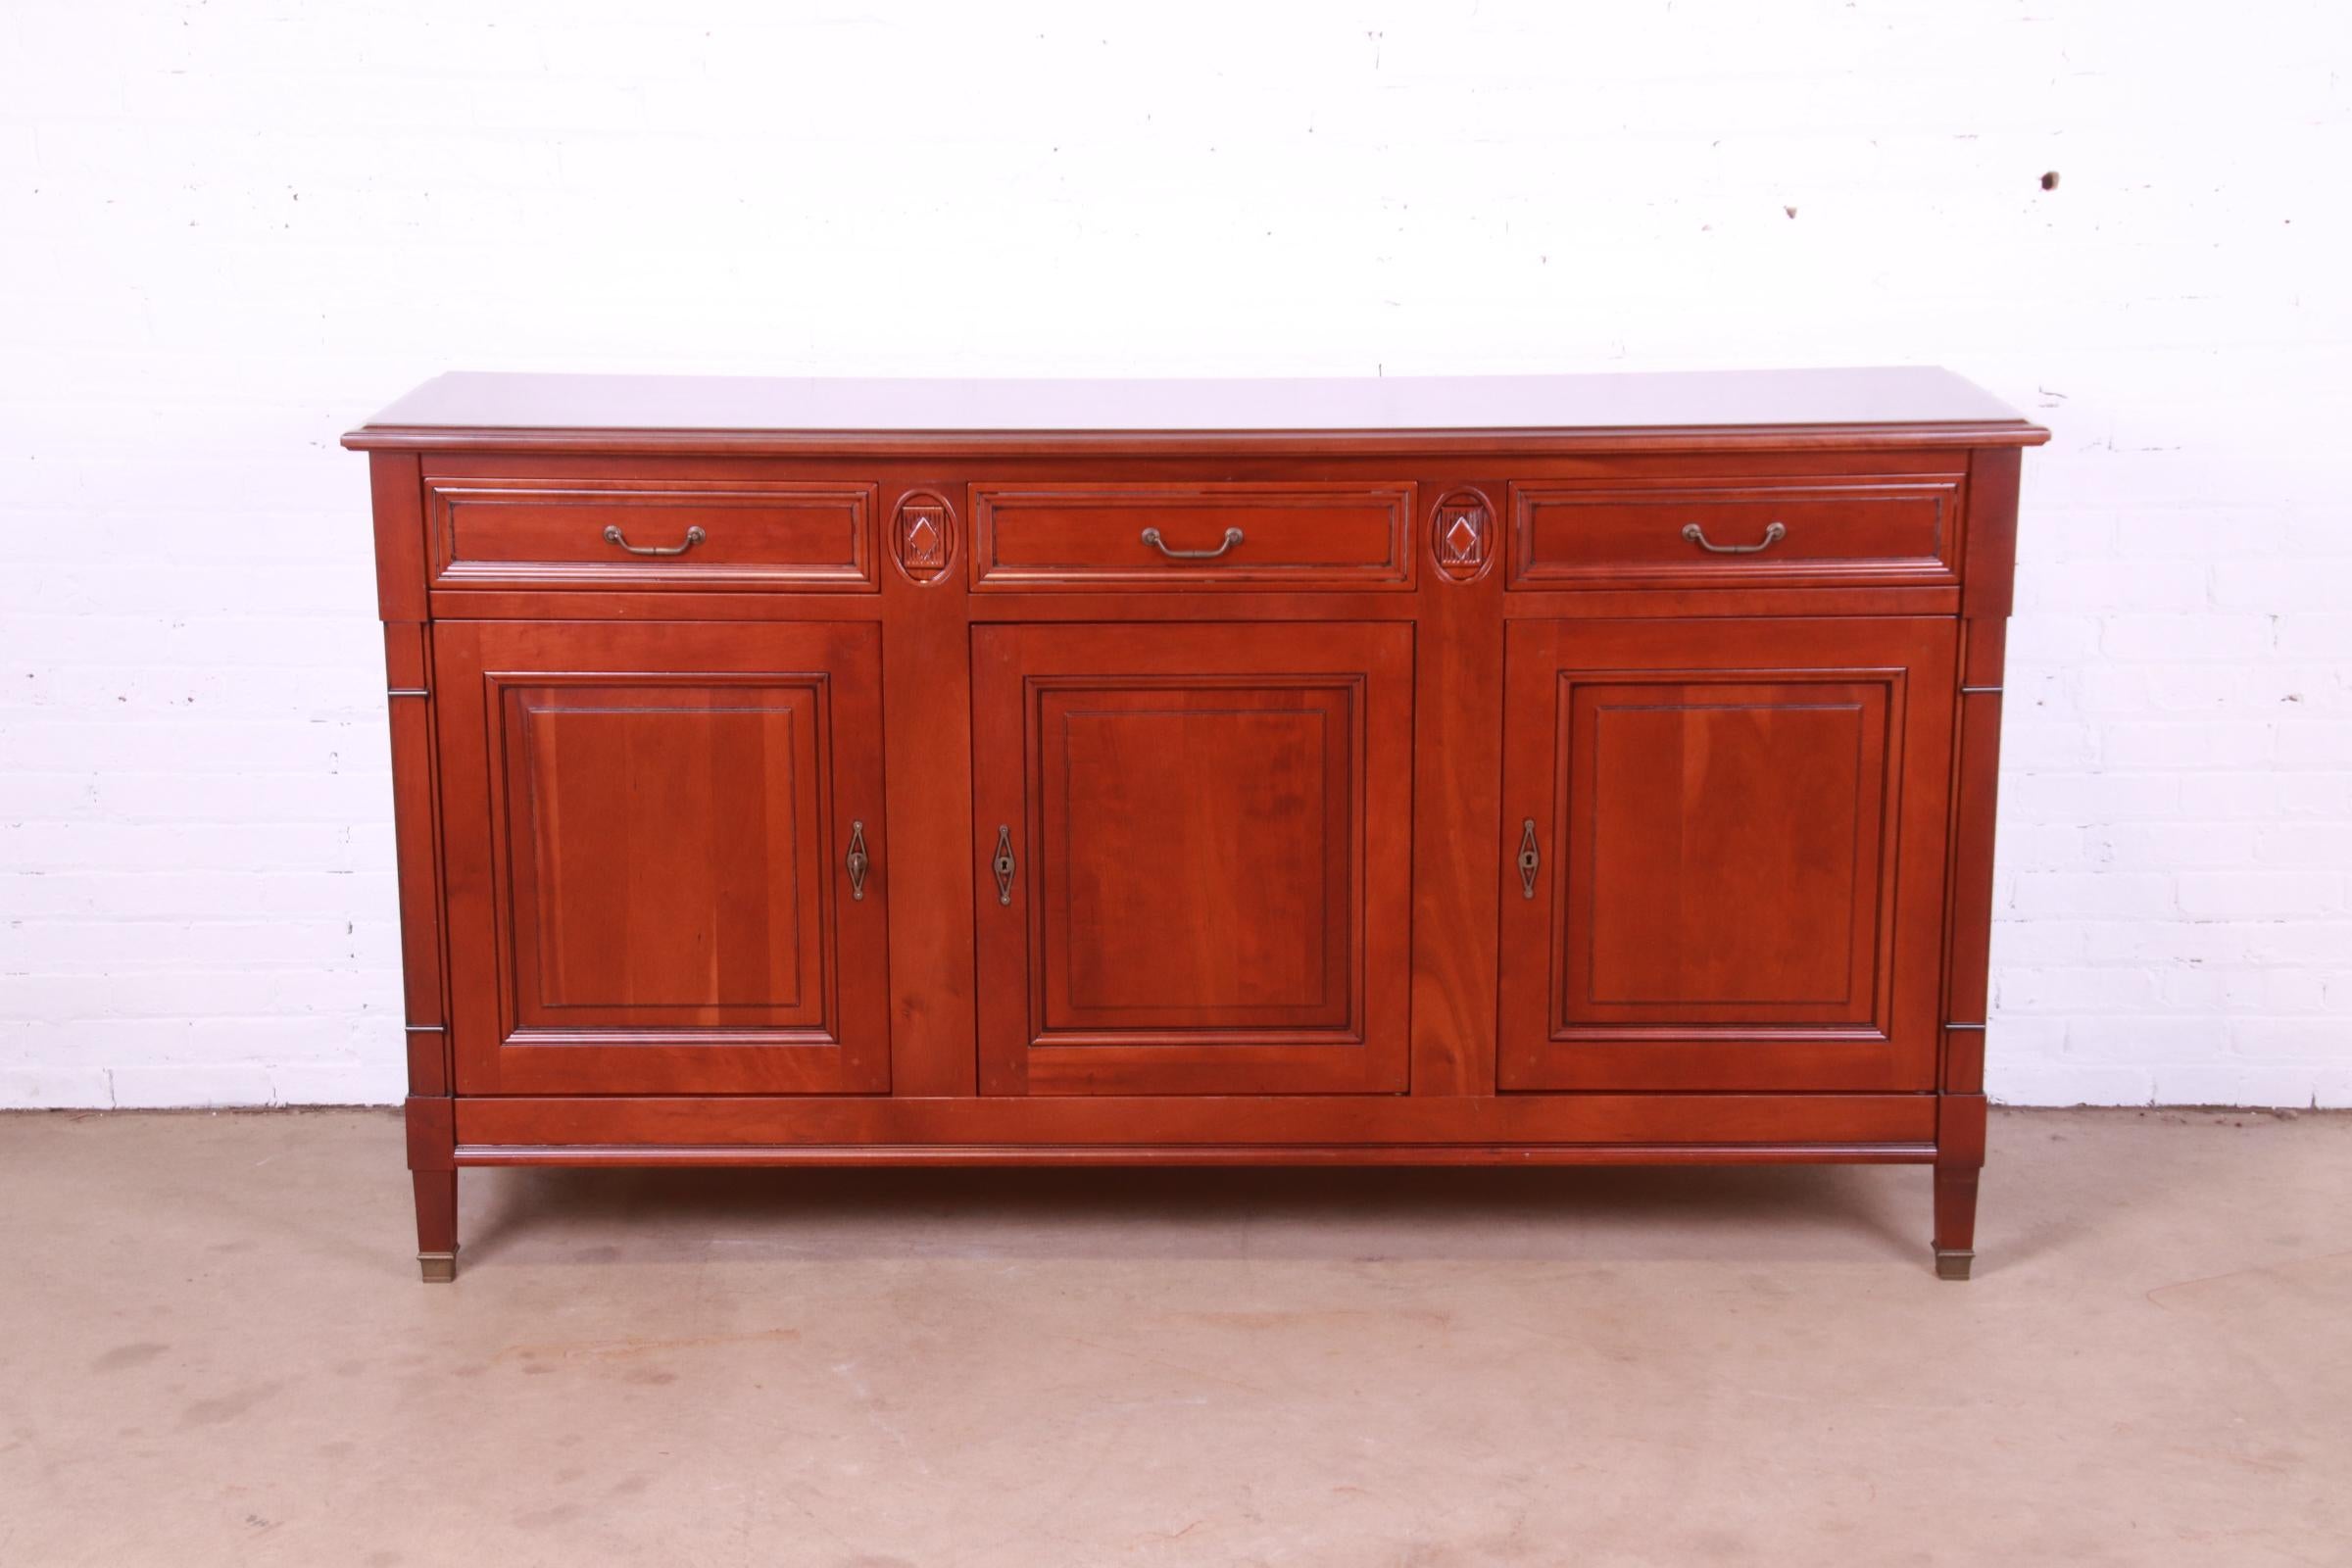 A gorgeous French Provincial Louis XVI style solid cherry wood sideboard, credenza, or bar cabinet

By Grange

France, 1990s

Measures: 75.63